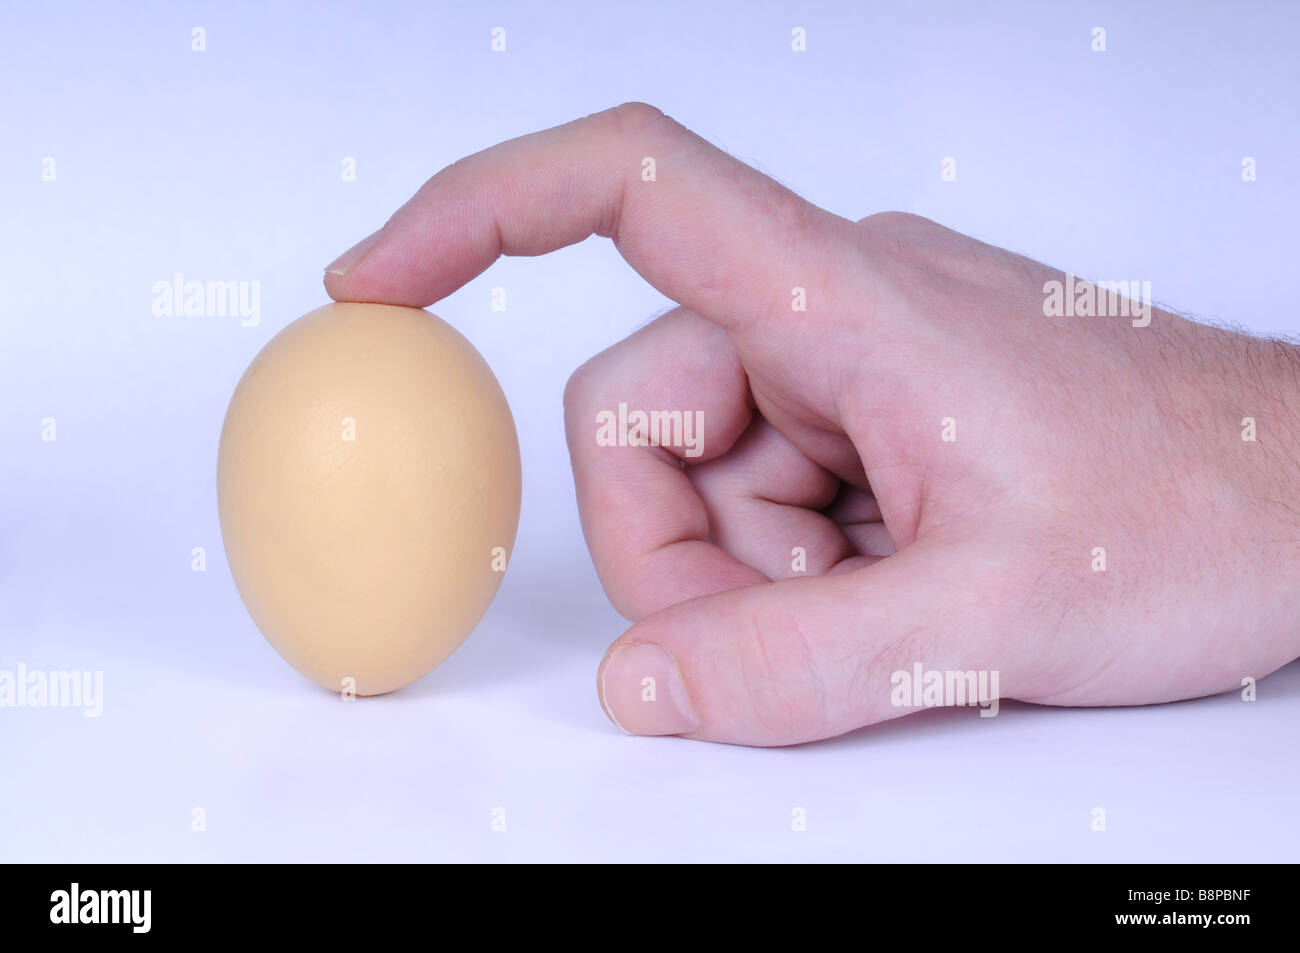 The Egg of Columbus - hand trying to make an egg stand on the tip. Stock Photo